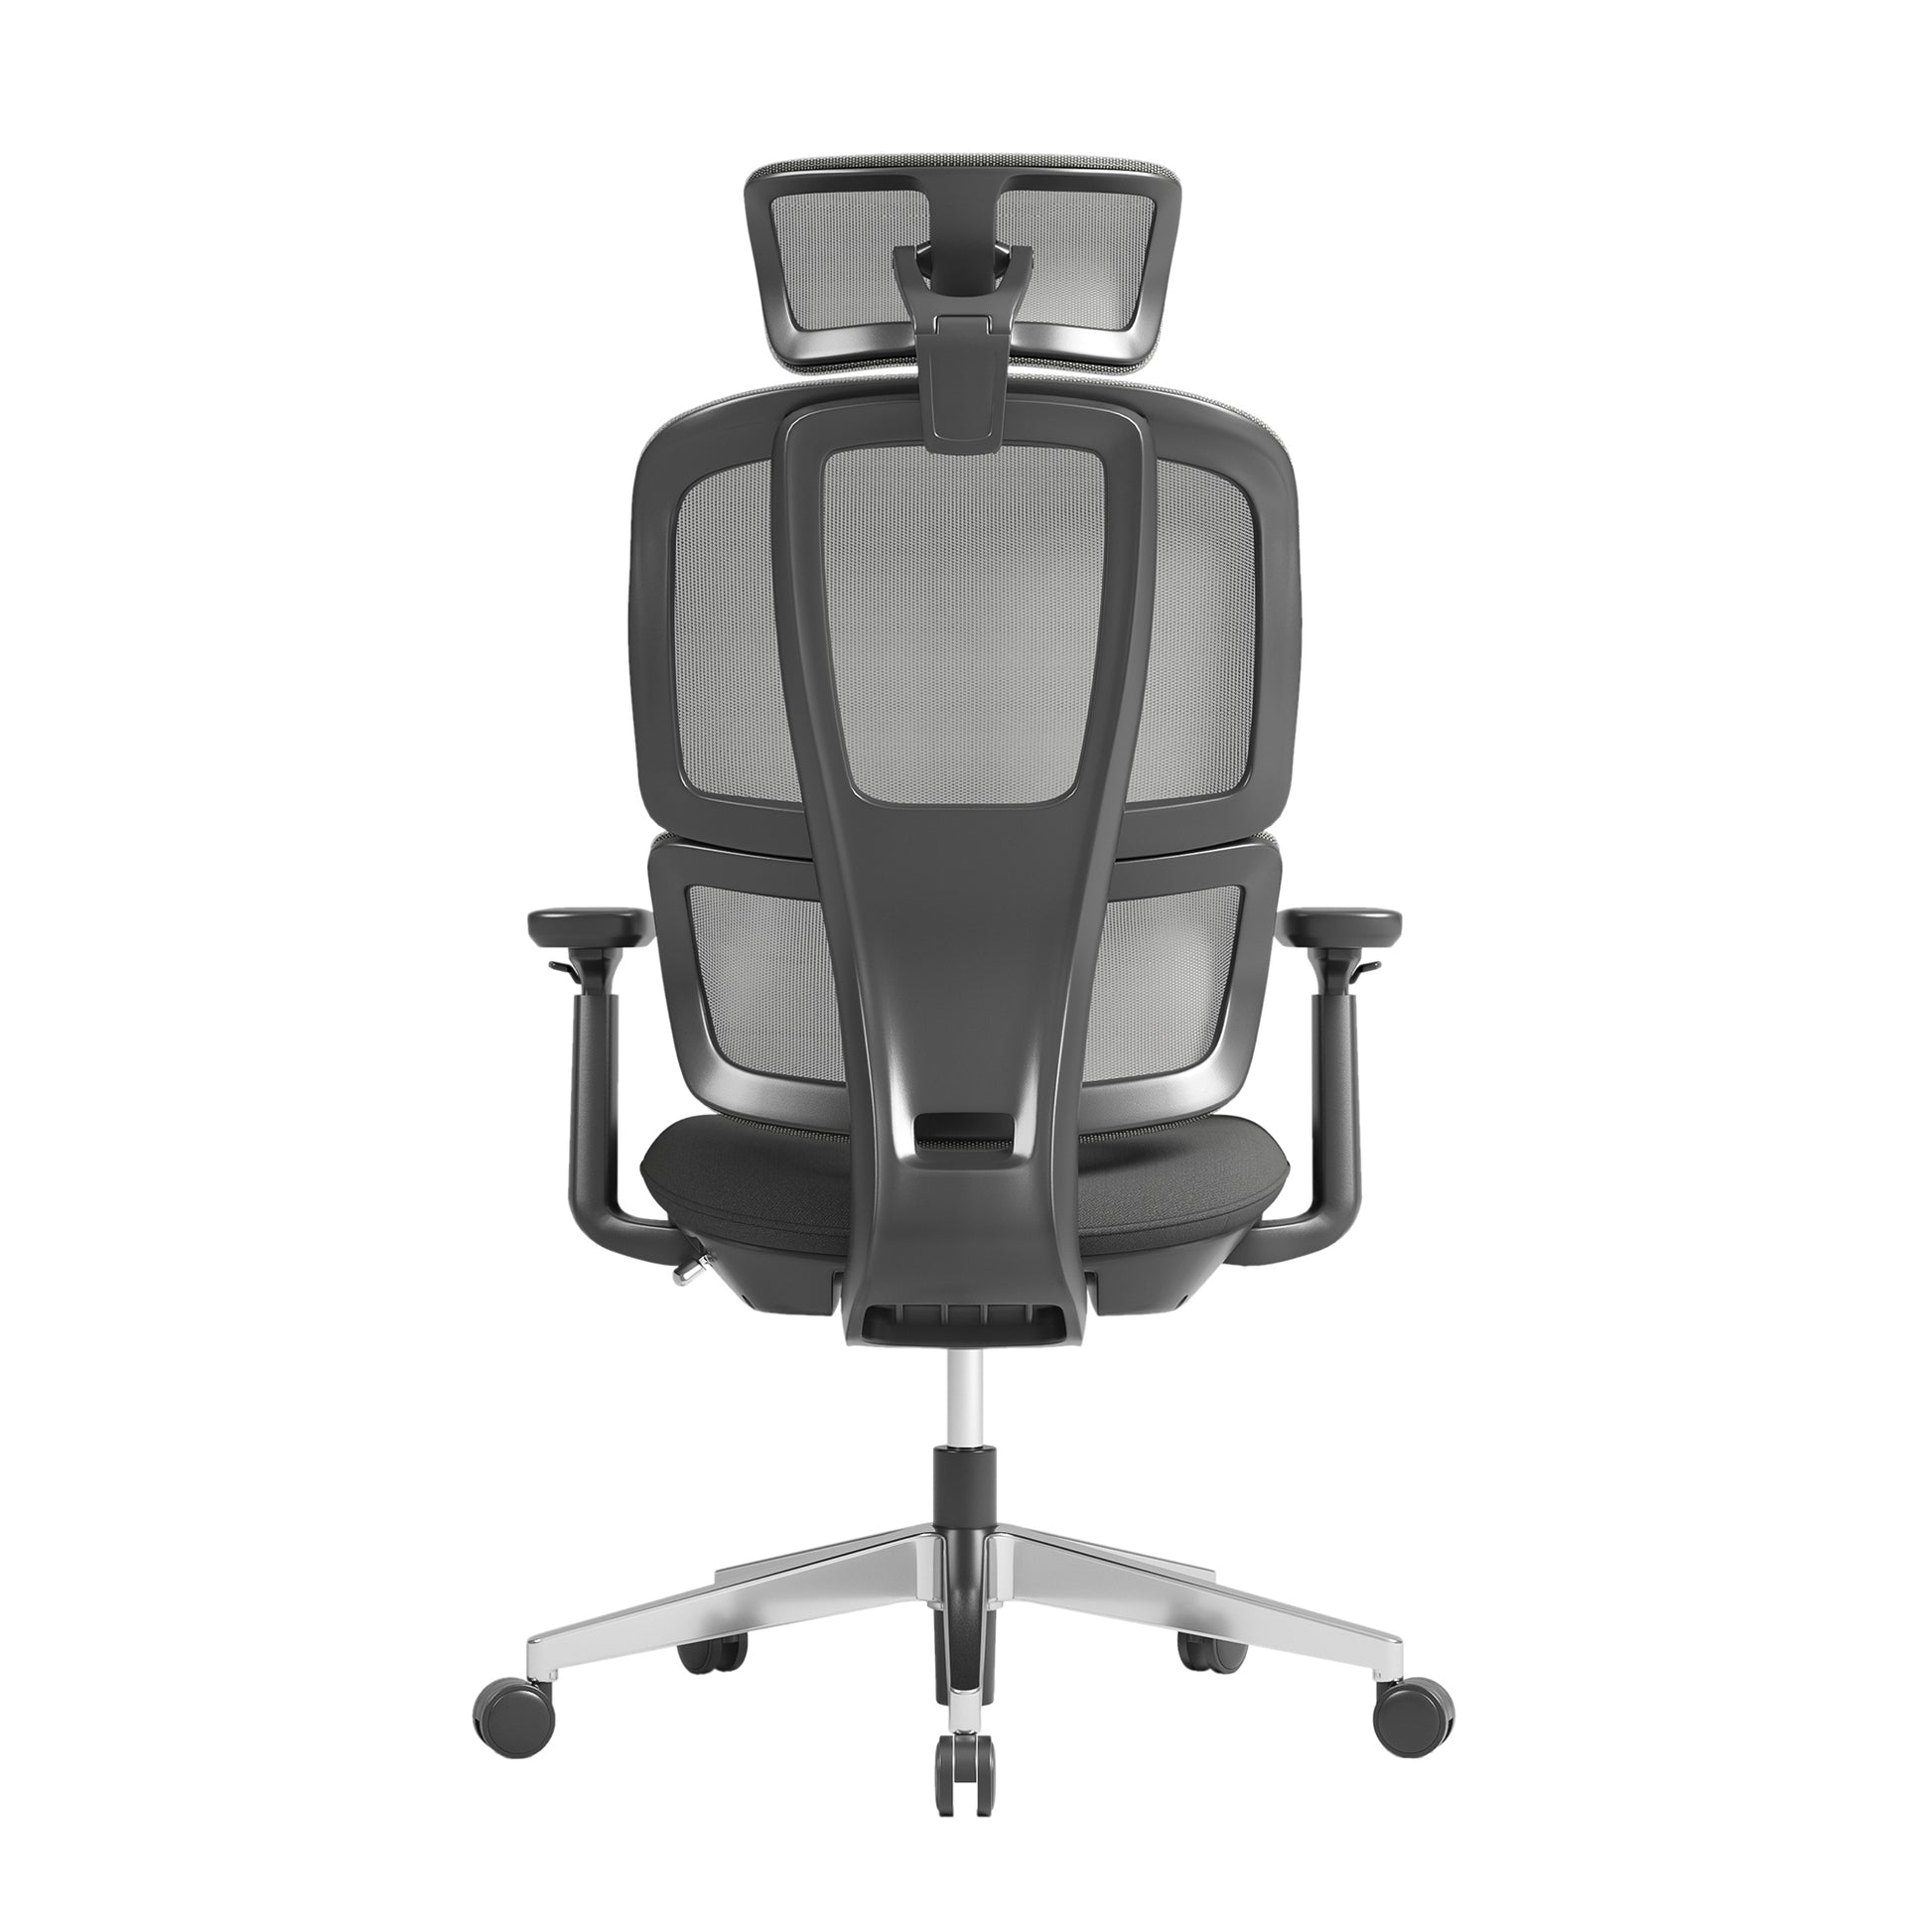 H2 Office Chair - Task Chair | Tollo.co.uk  